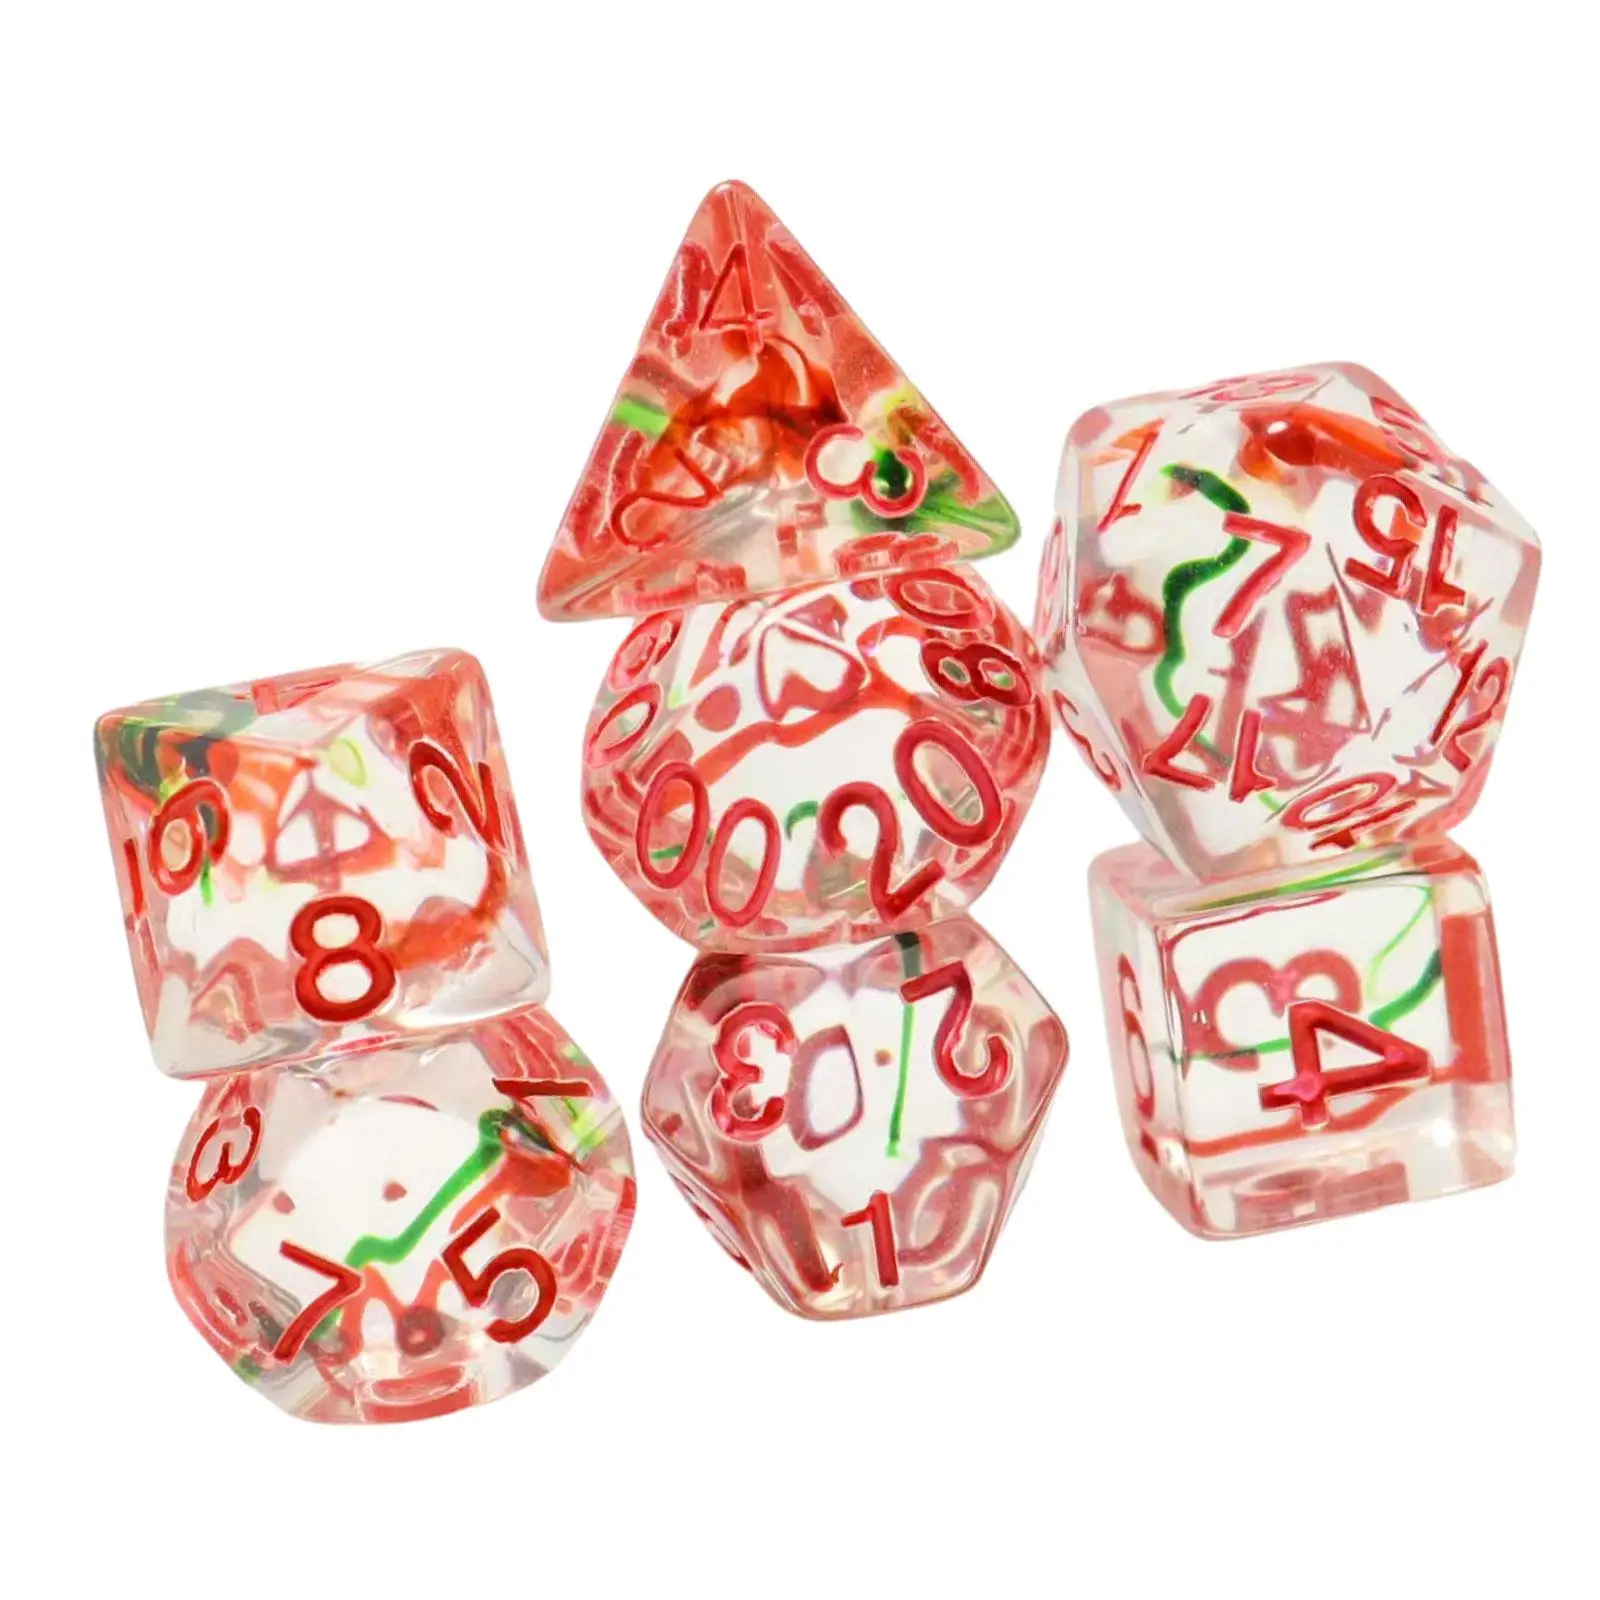 7x Dice Set Resin Math Teaching Toys Polyhedral Dices for KTV Party Bar